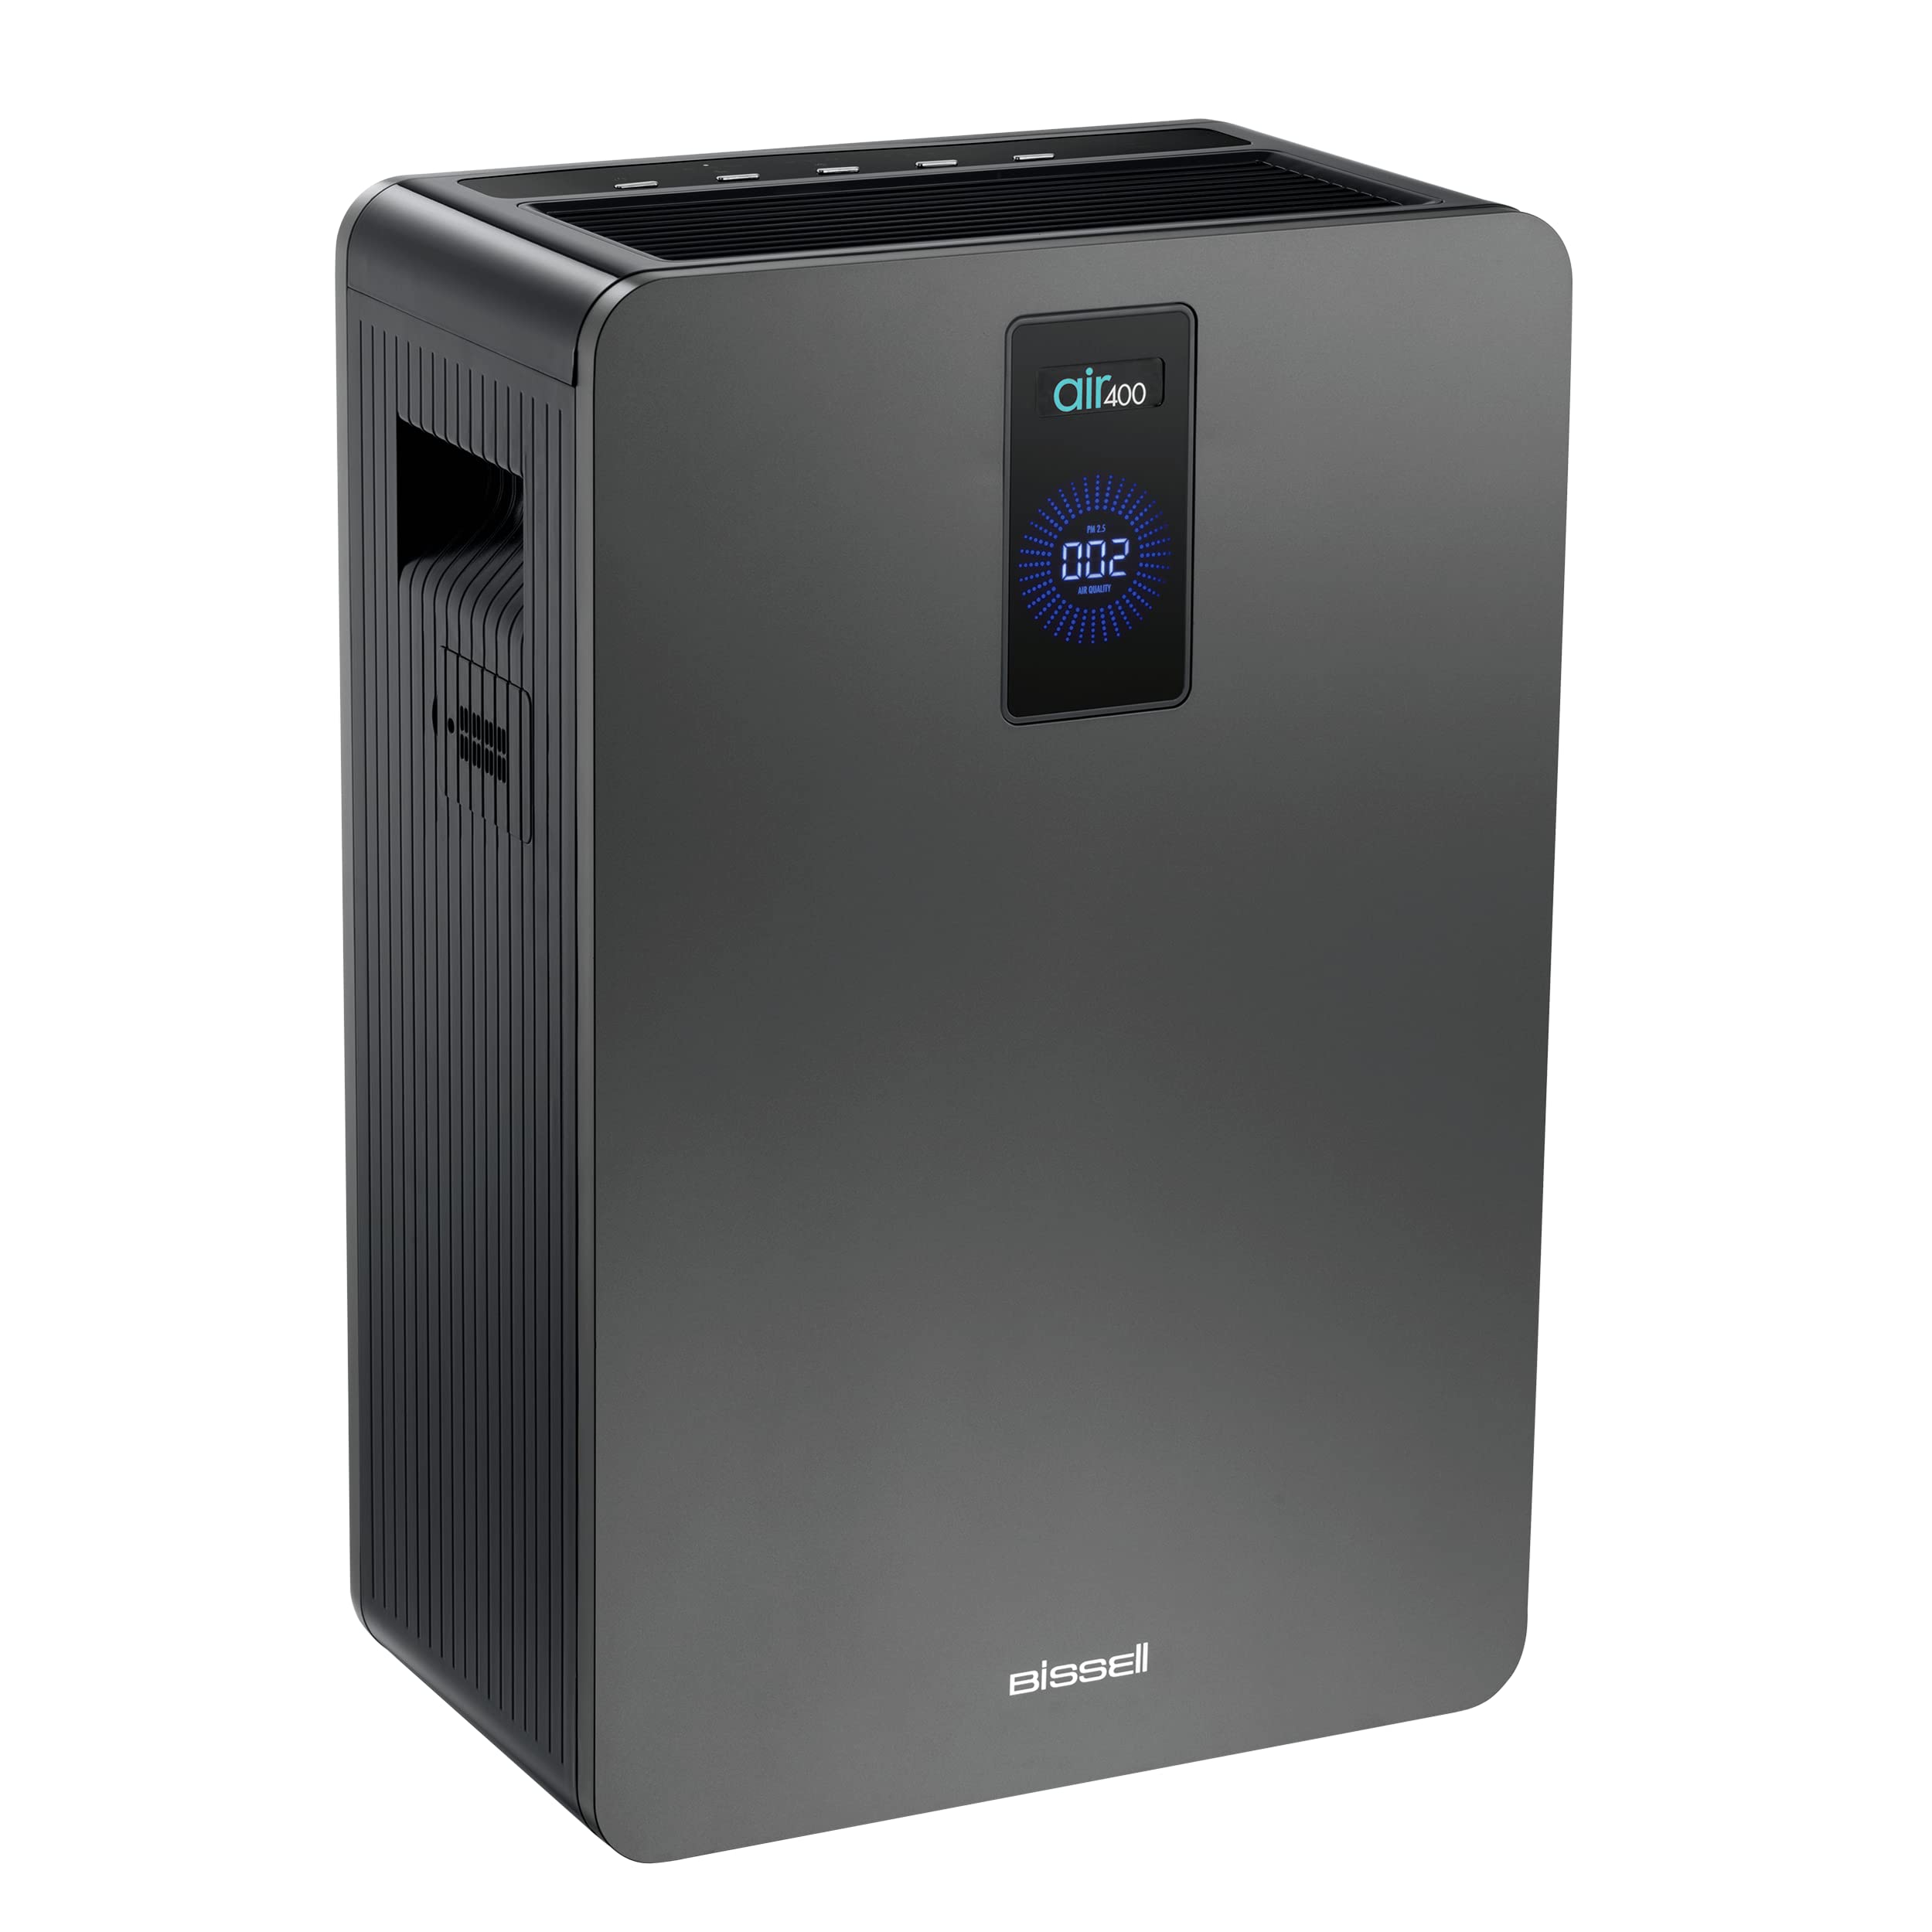 Bissell air400 Professional Air Purifier w/ HEPA & Carbon Filters $99.34 + Free Shipping ~ Wayfair